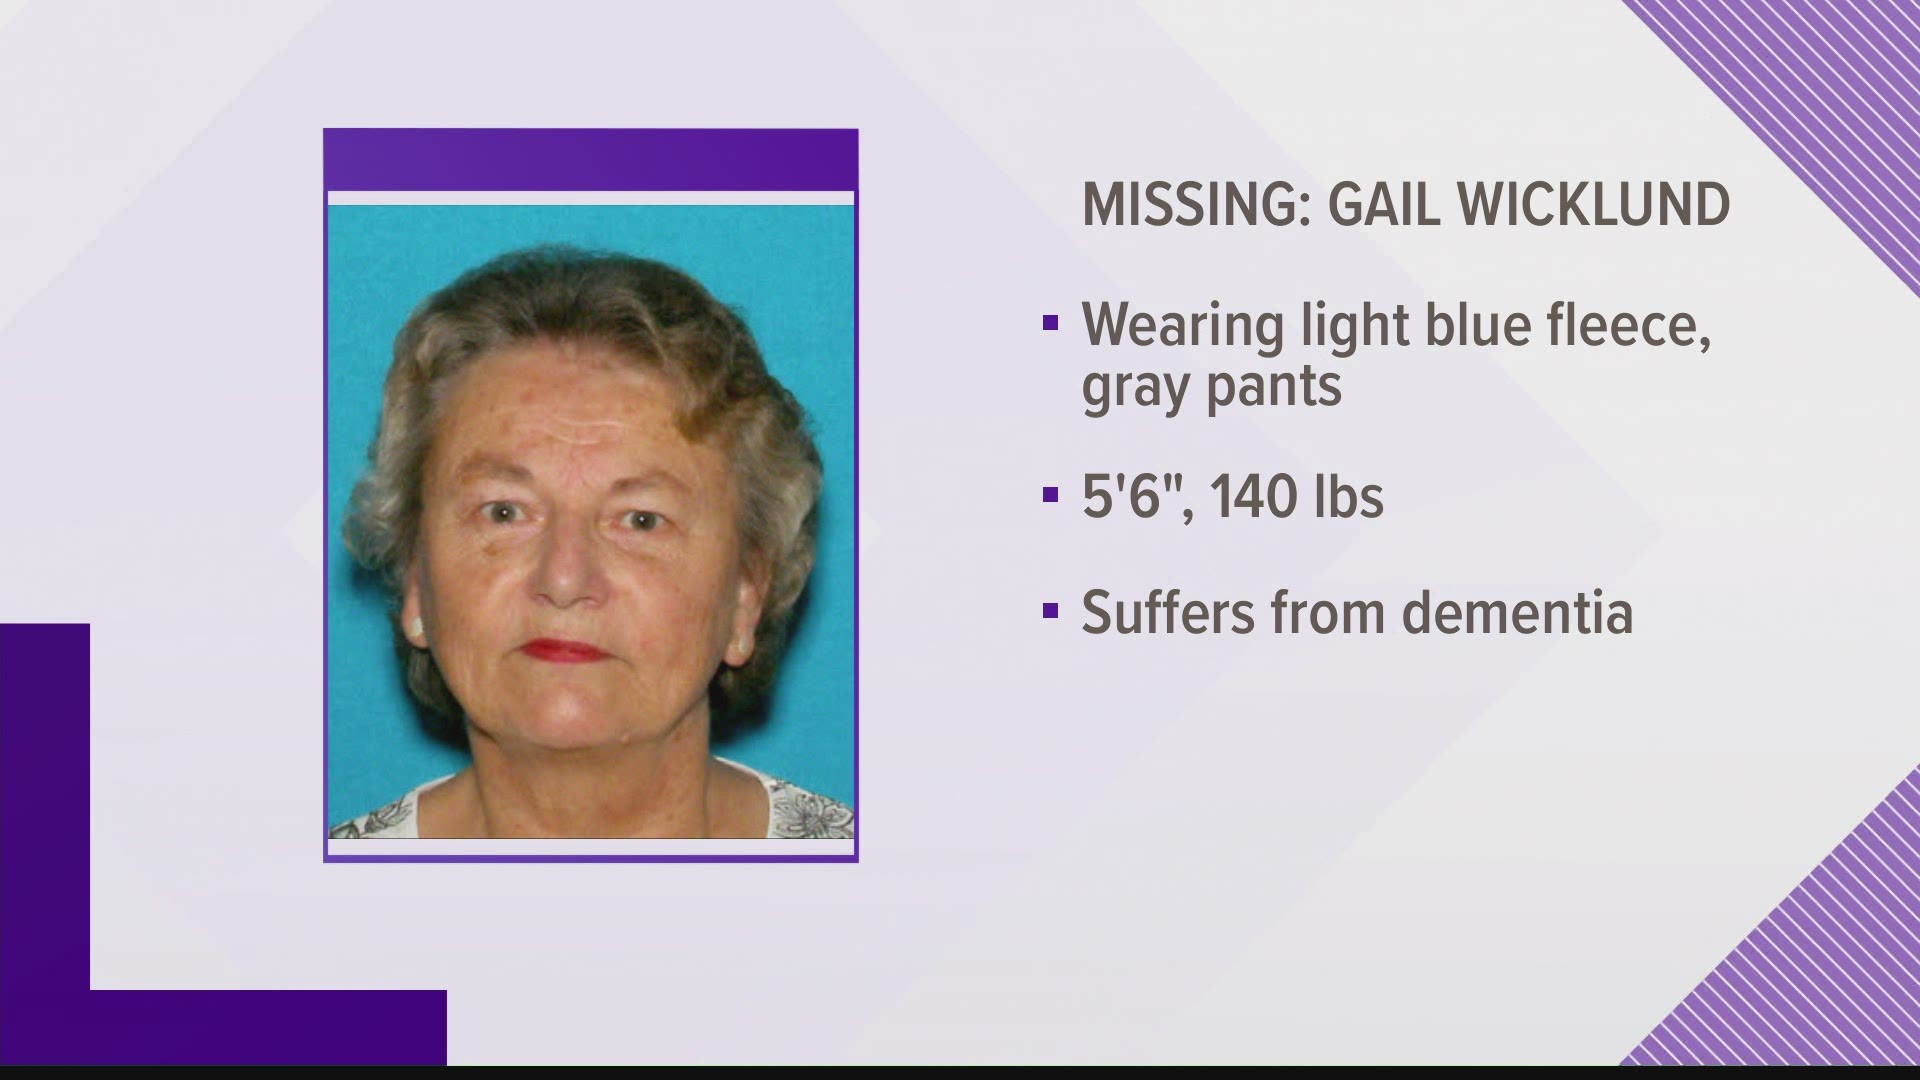 Gail Wicklund of 8 desert brook road was last seen before 11 this morning traveling on foot.  Wicklund was last seen wearing a light blue fleece and gray pants.